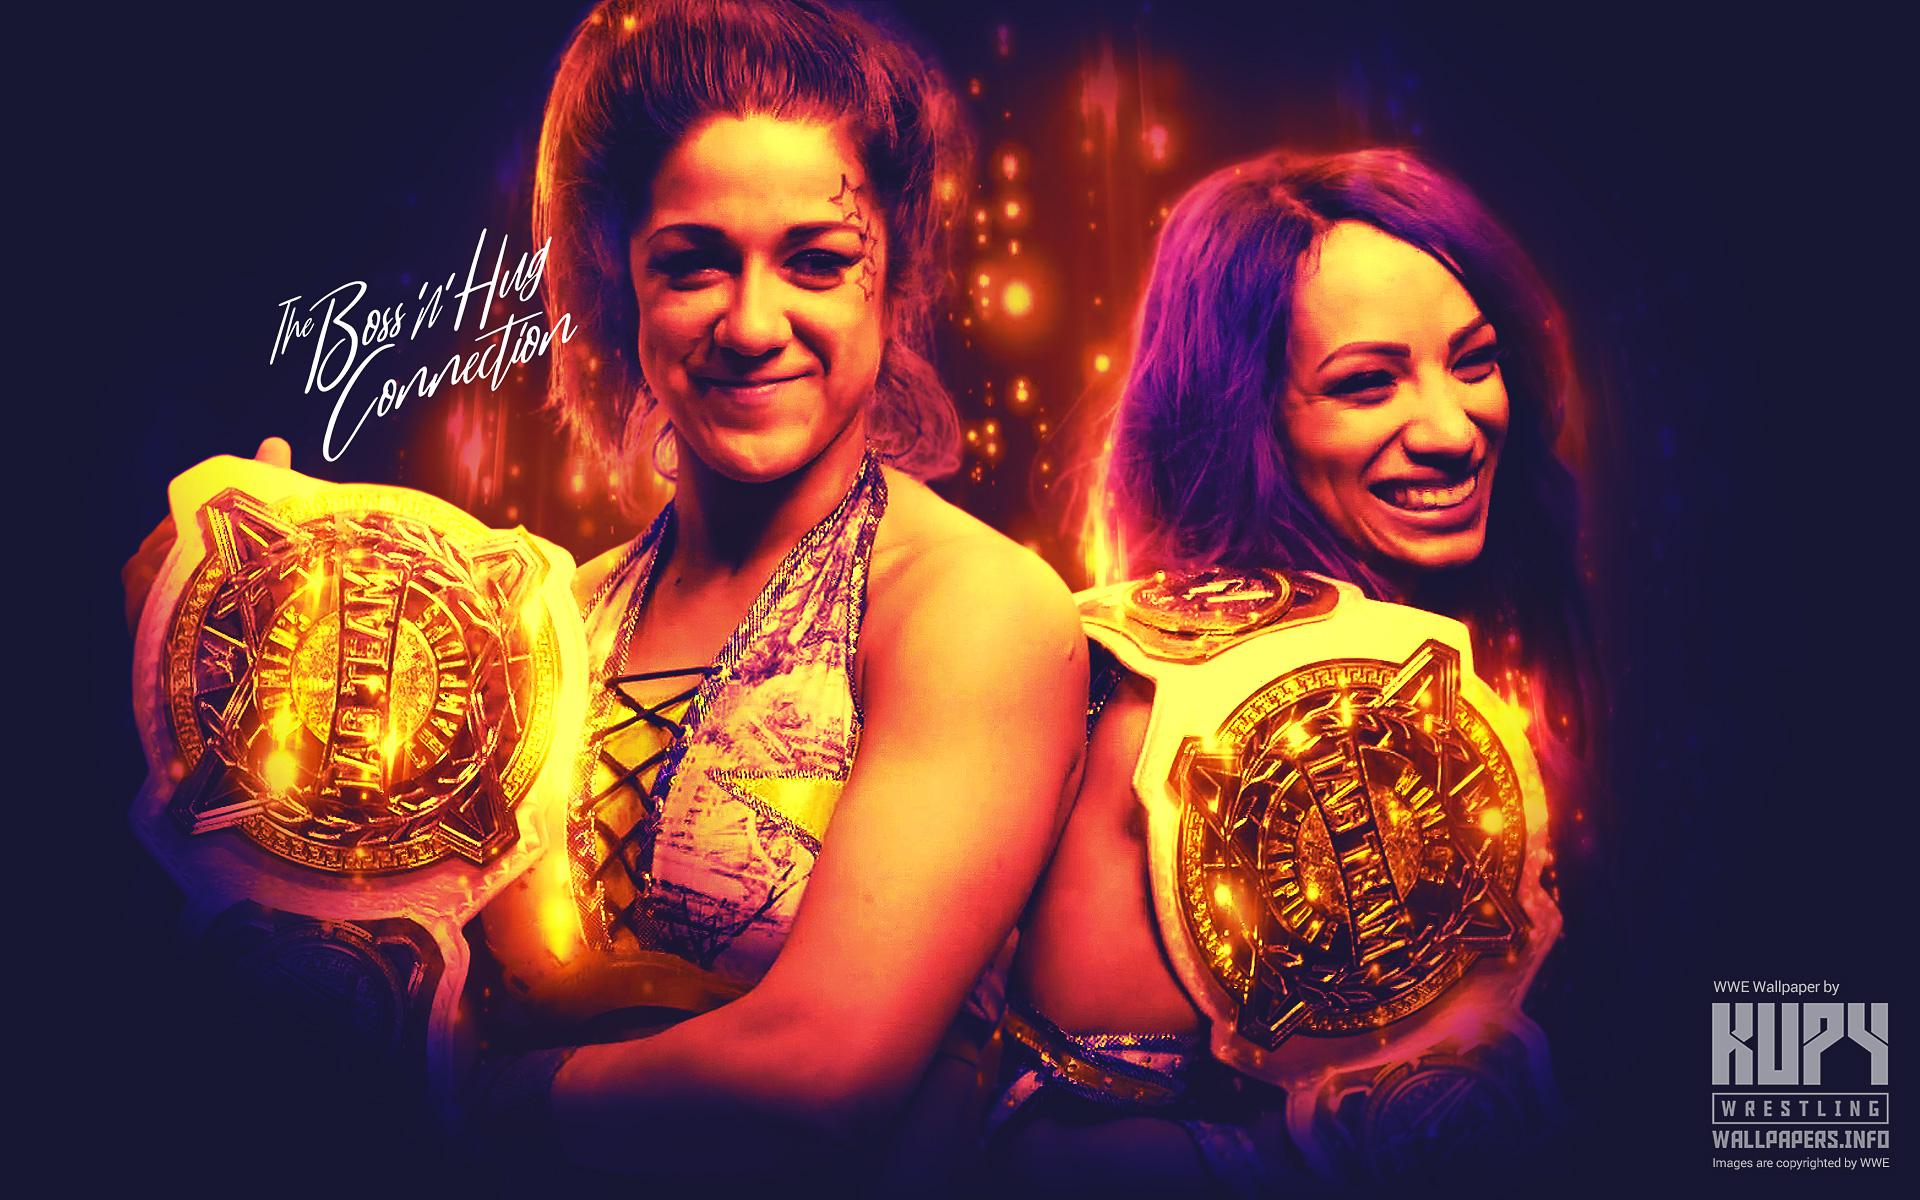 First Ever WWE Women's Tag Team Champions: The Boss 'N' Hug